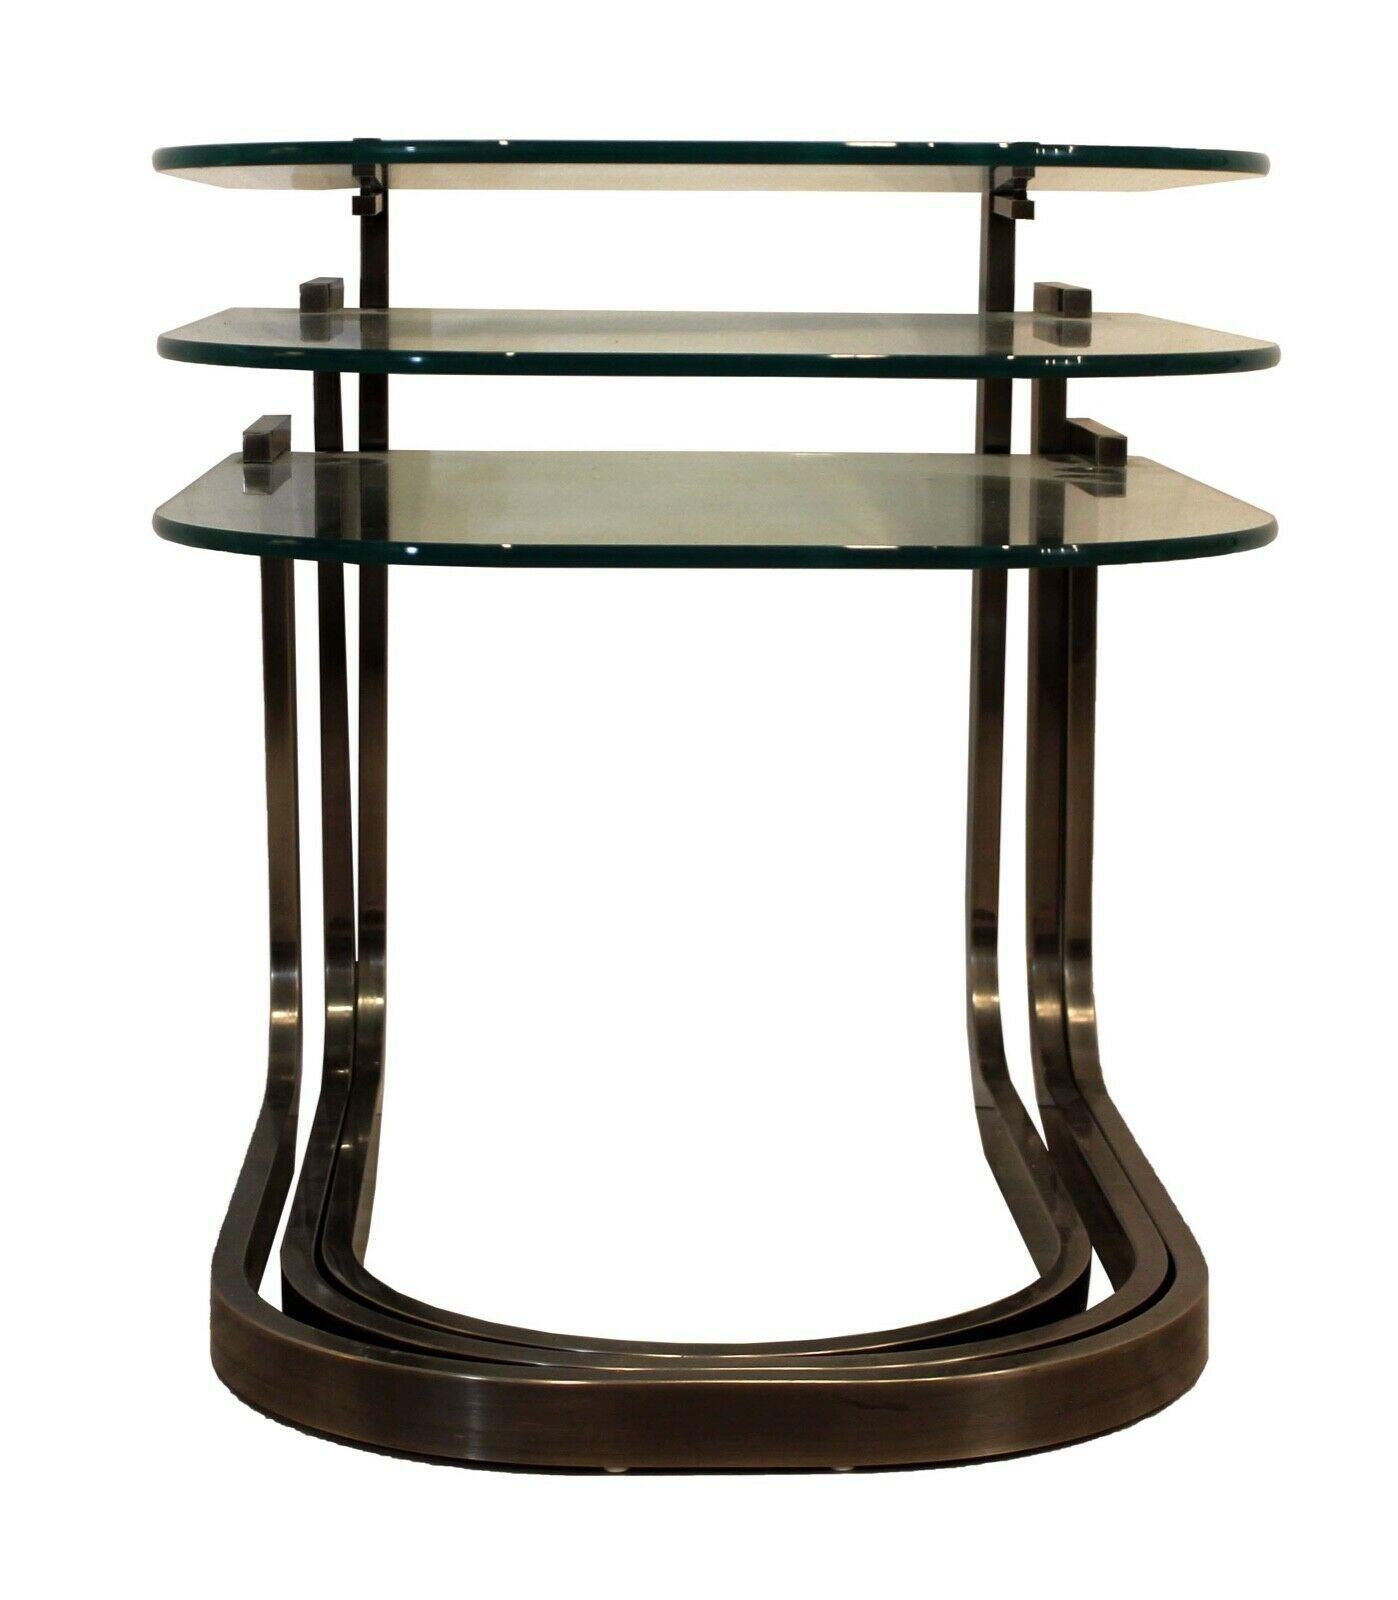 From the Design Institute of American (DIA), this set of three tables nest neatly together to create a sculpture profile of glass tops supported by bent, brushed pewter frames. In good condition, this set shows wear consistent with age as noted in